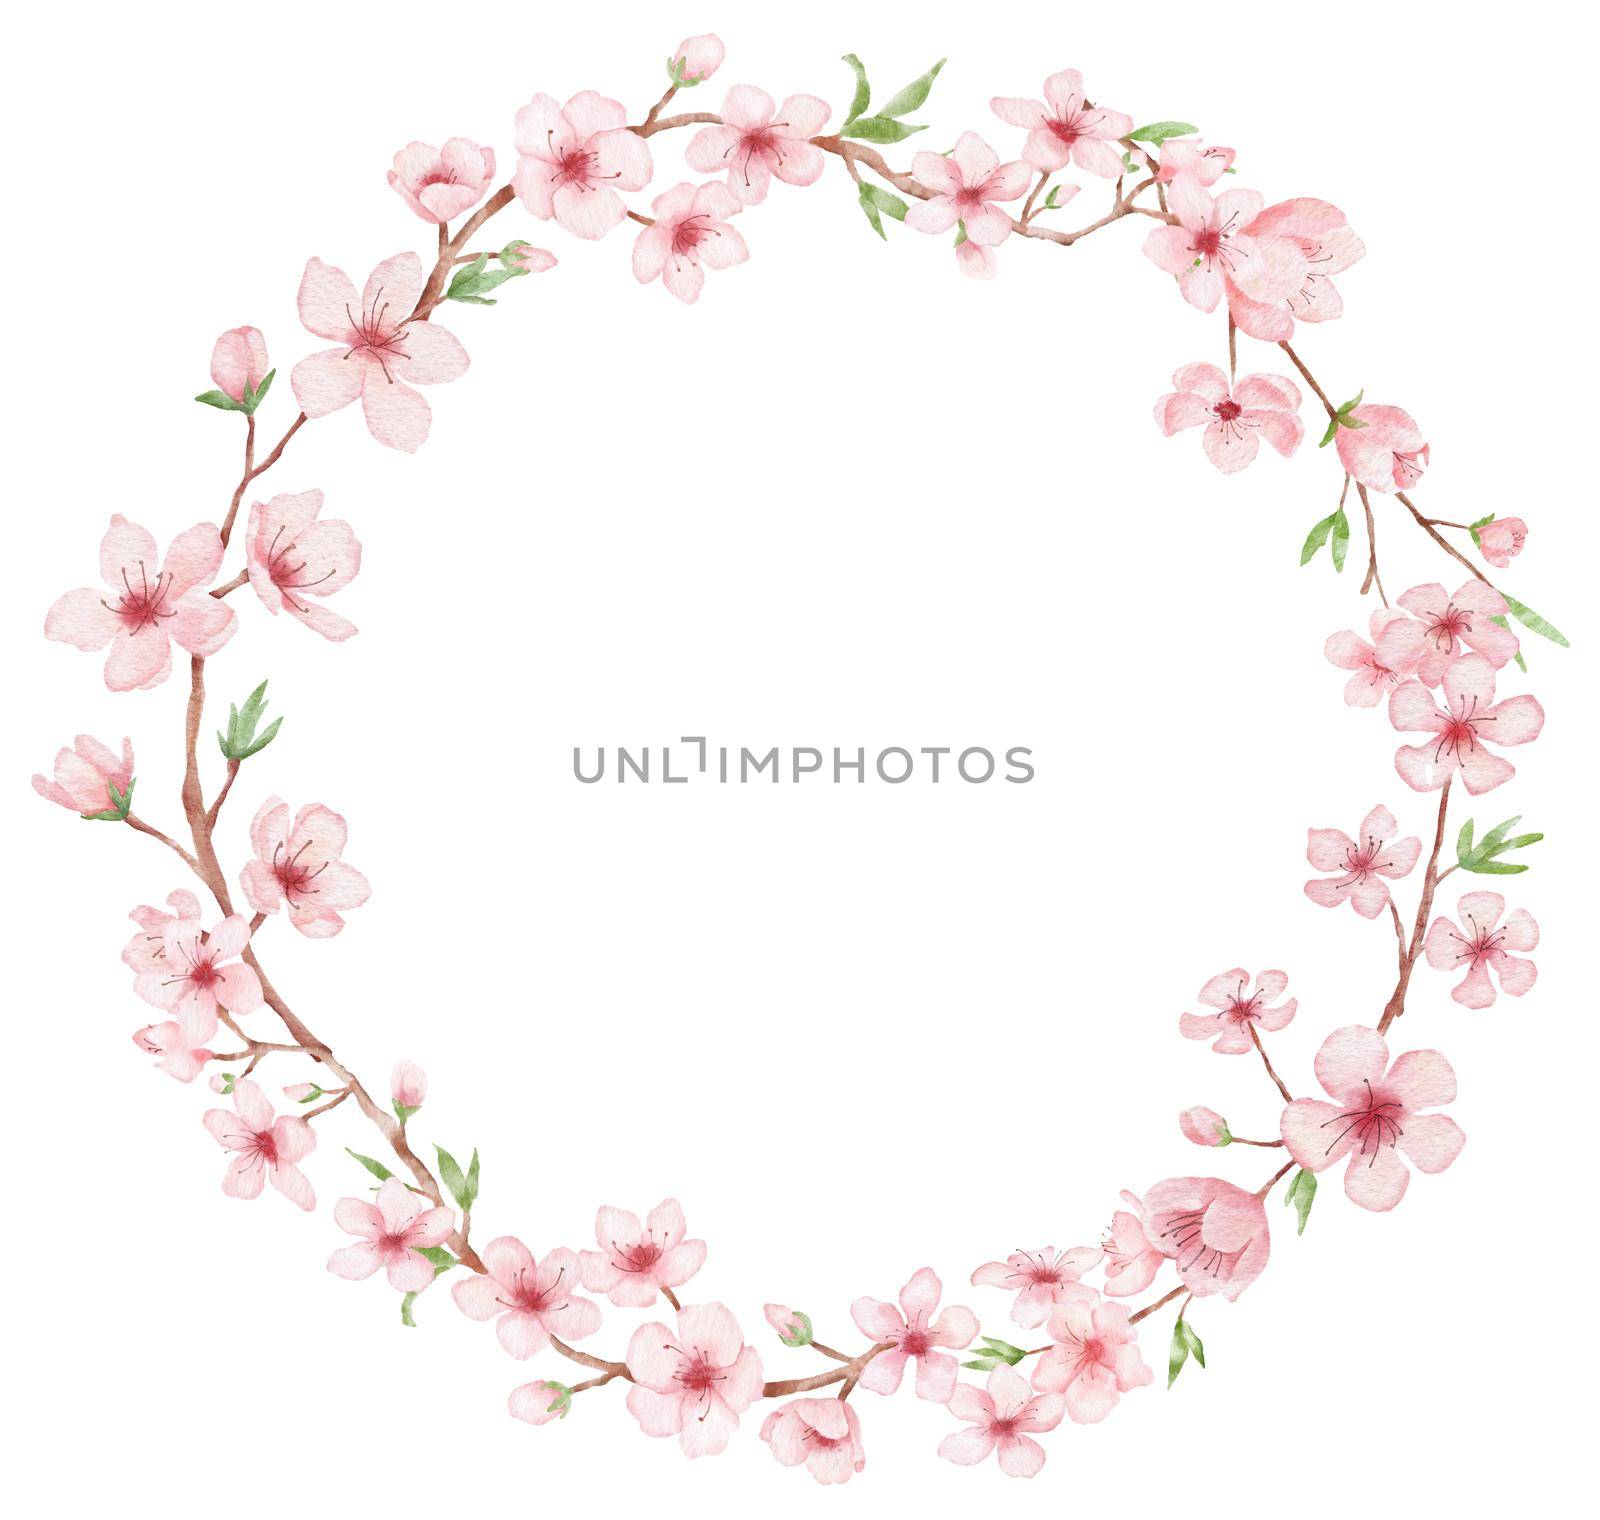 Round frame with Branch of Cherry blossom illustration. Watercolor painting sakura wreath isolated on white. Japanese flower by ElenaPlatova